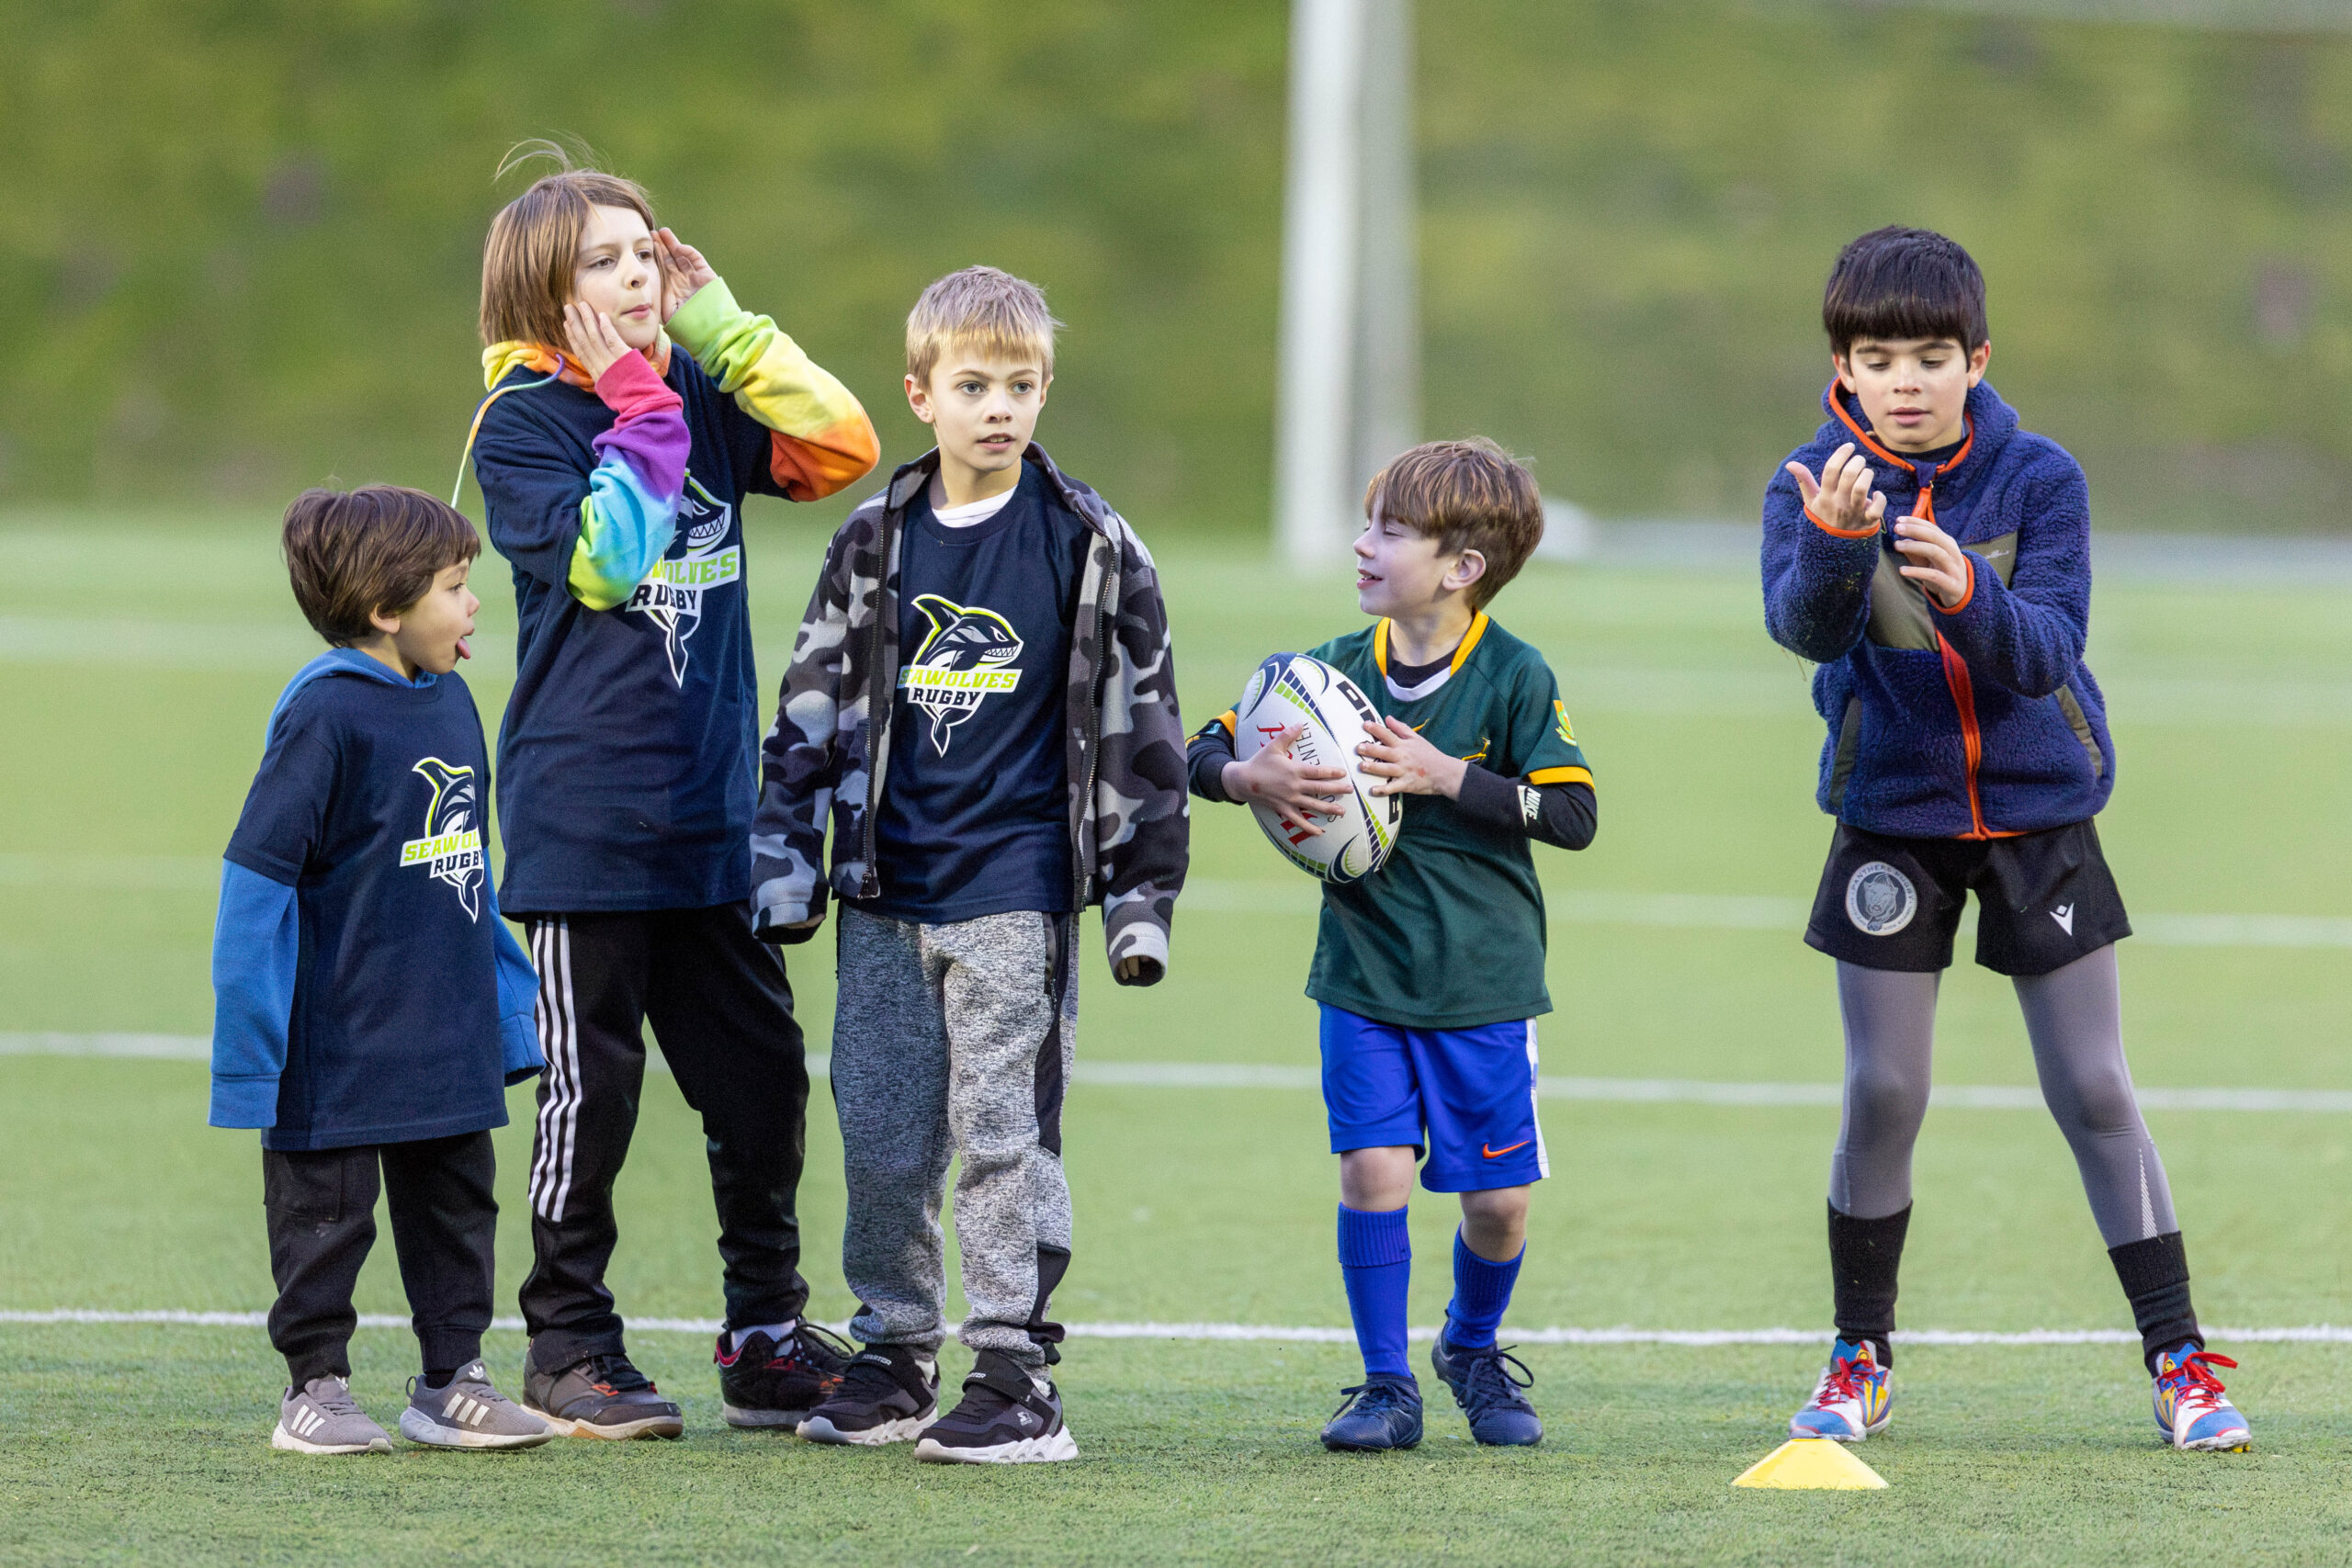 Run With The Pack Youth Rugby Camp – Friday, May 3rd